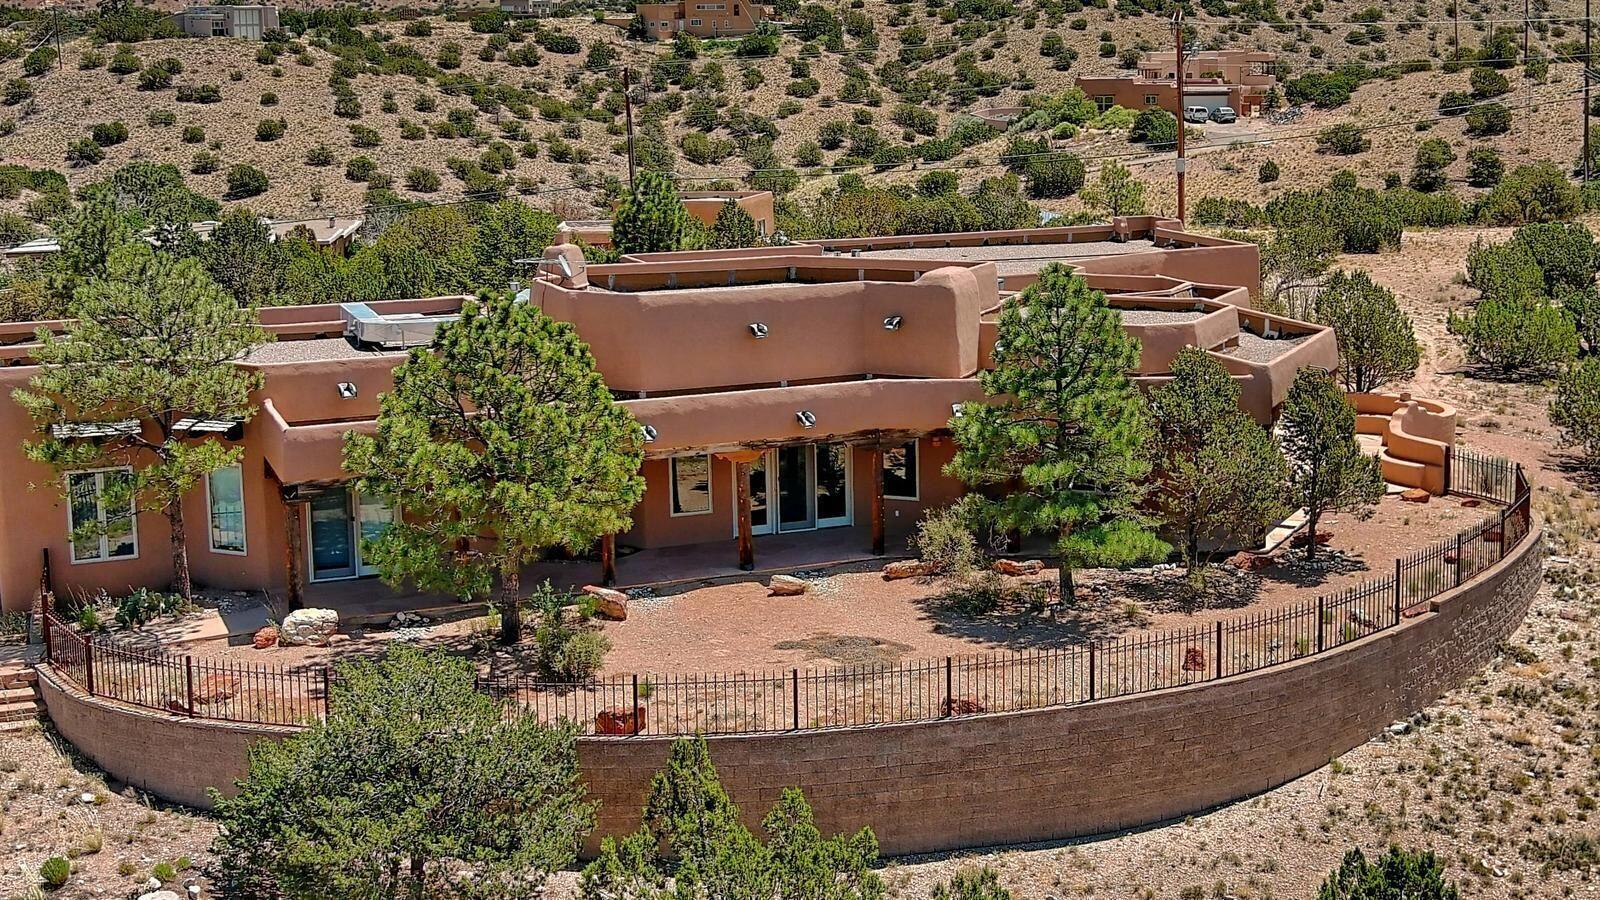 From the Front Door to the Outdoor living spaces, quality is here! This SW Contemporary is Convenient to Santa Fe and Albuquerque!  ONE STORY and Accessible. Amenities and Views Galore! Structolite Plaster Walls,Sandstone Flooring, Kiva Fireplaces, 7000+ sq.ft. under roof! Includes - 4 Car Garage, Portals, & 2 Car Carport. This Enchanting and Stunning Santa Fe Style Home is your next destination in New Mexico. Set in the foothills of the north Sandia Peak Mountains,  Incredible  Mountain, City Light and Mesa Views. New Carpet, Newer Stucco, Easy Concrete Pathways surround the home! Live Beautifully between Albuquerque & Santa Fe. If you are in a 2 story and want an accessible ONE STORY- this is it!